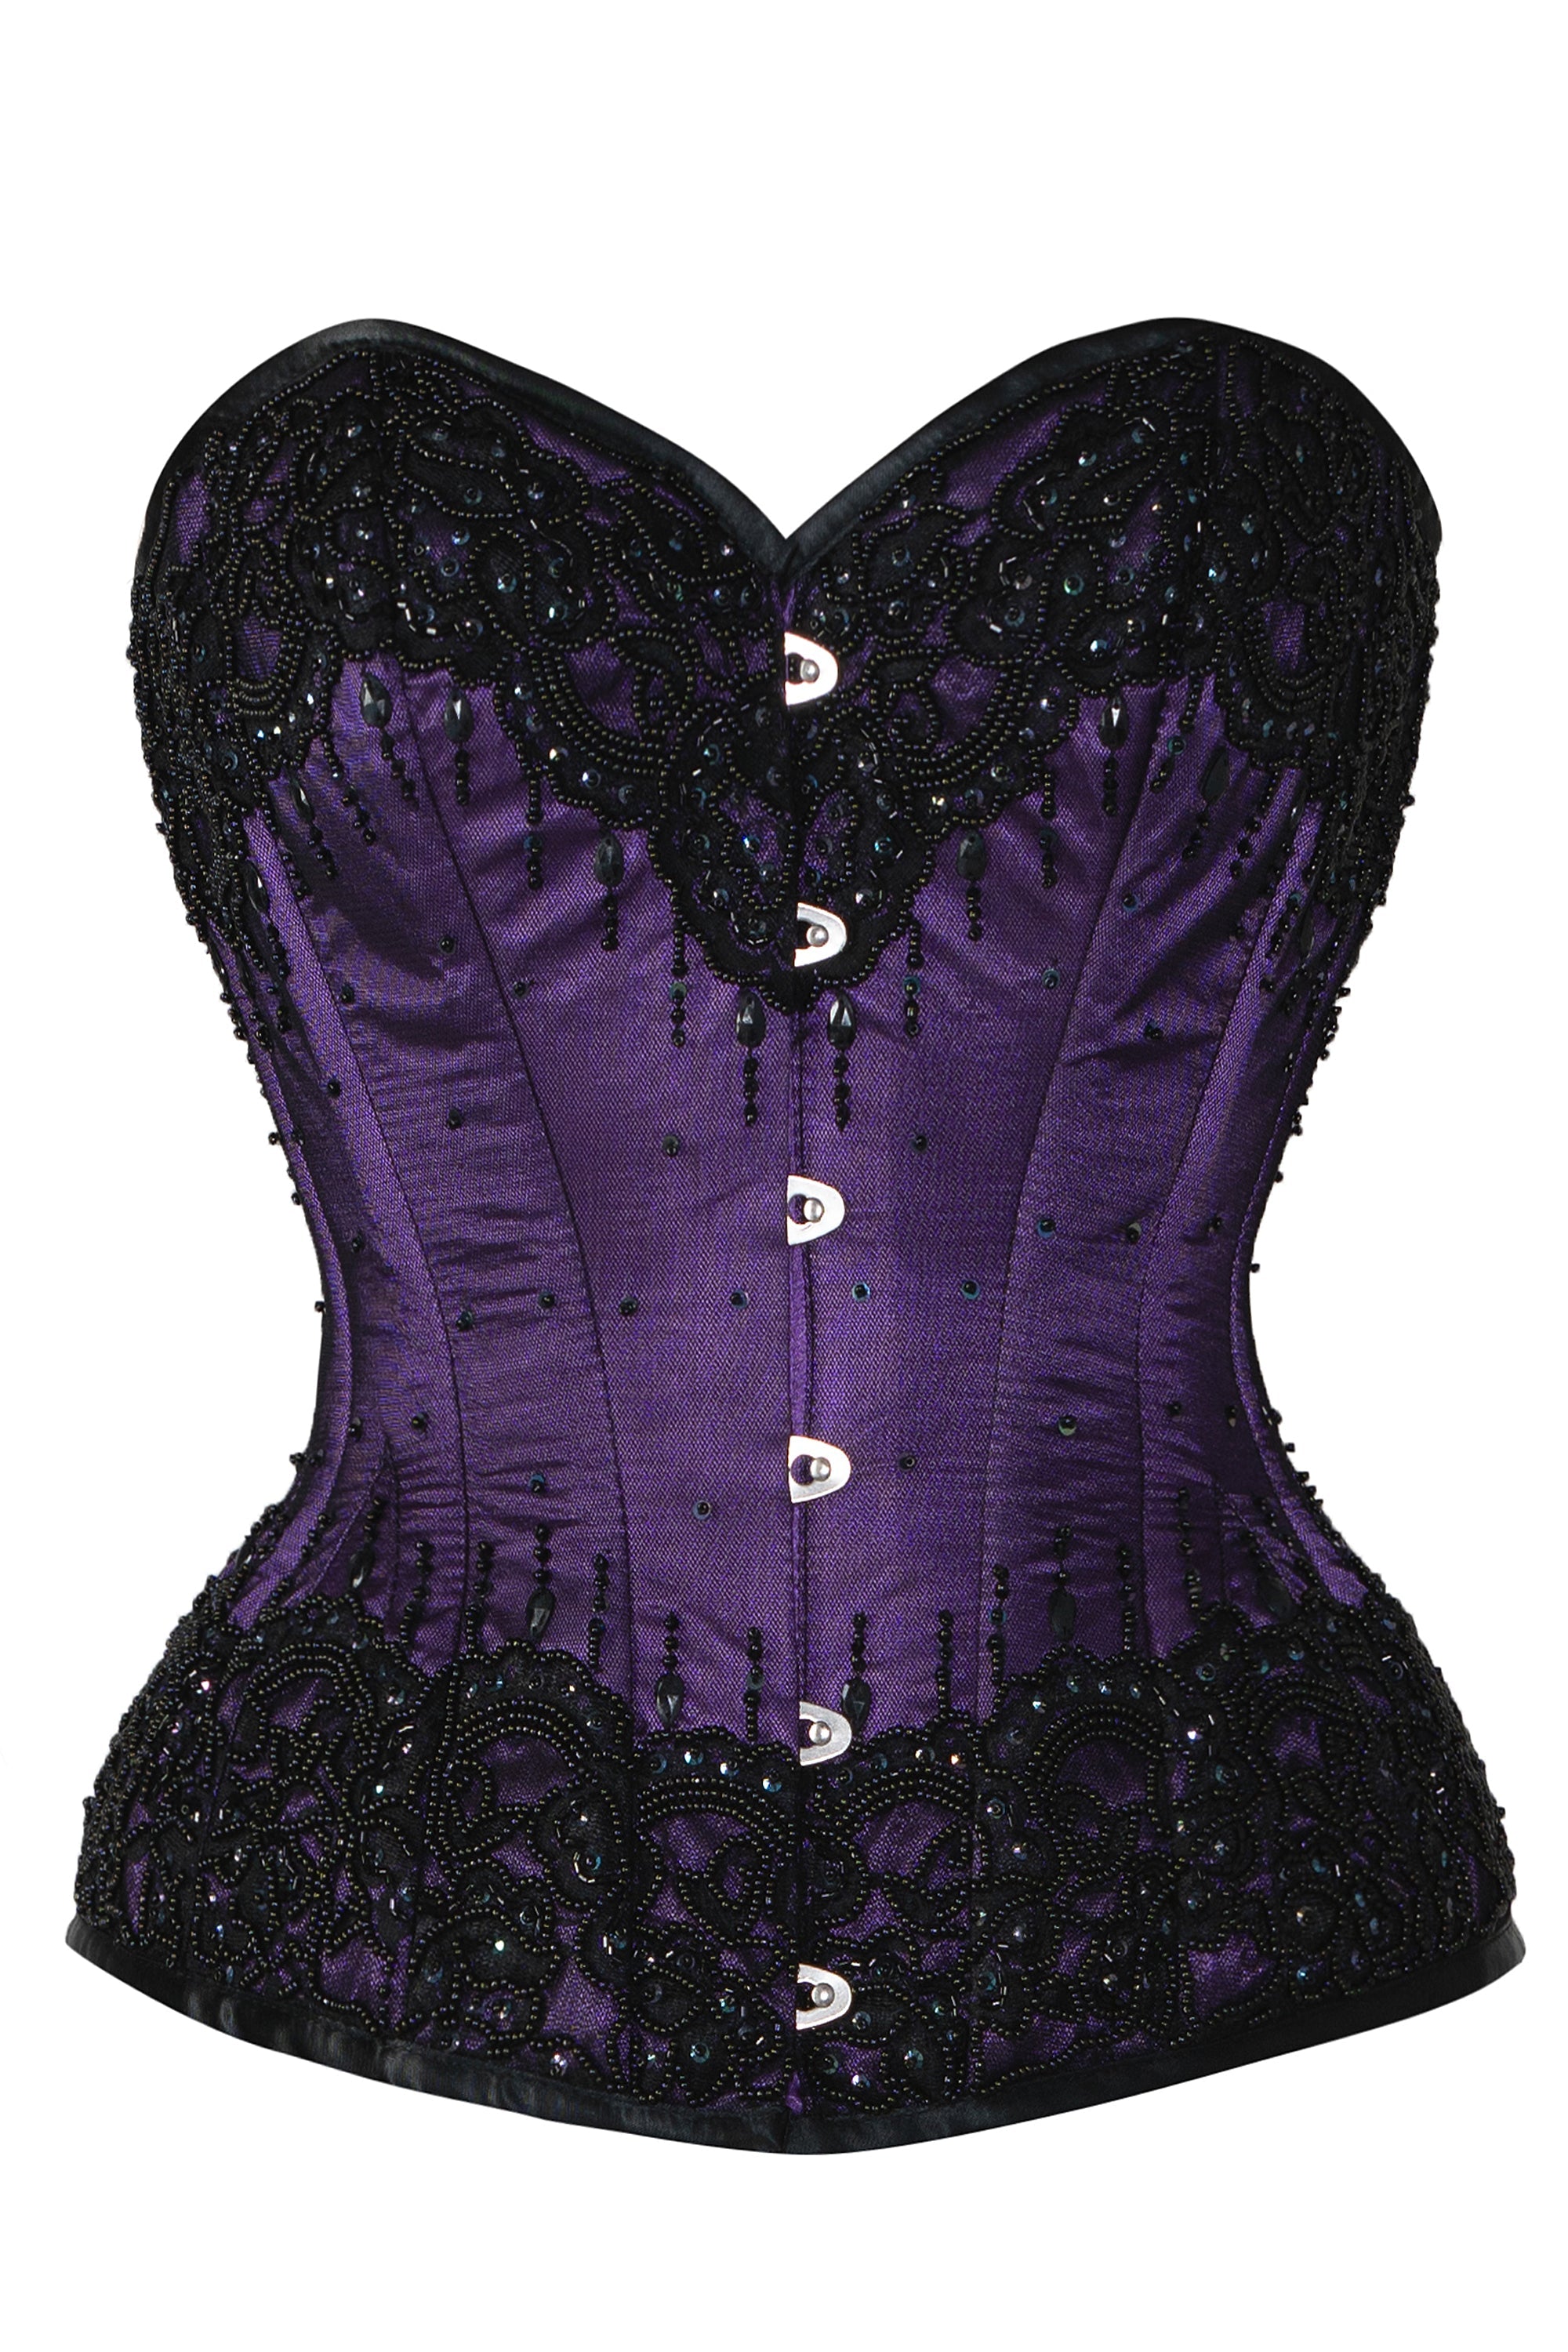 VAACODOR CORSET, no sizing on it but laid flat the